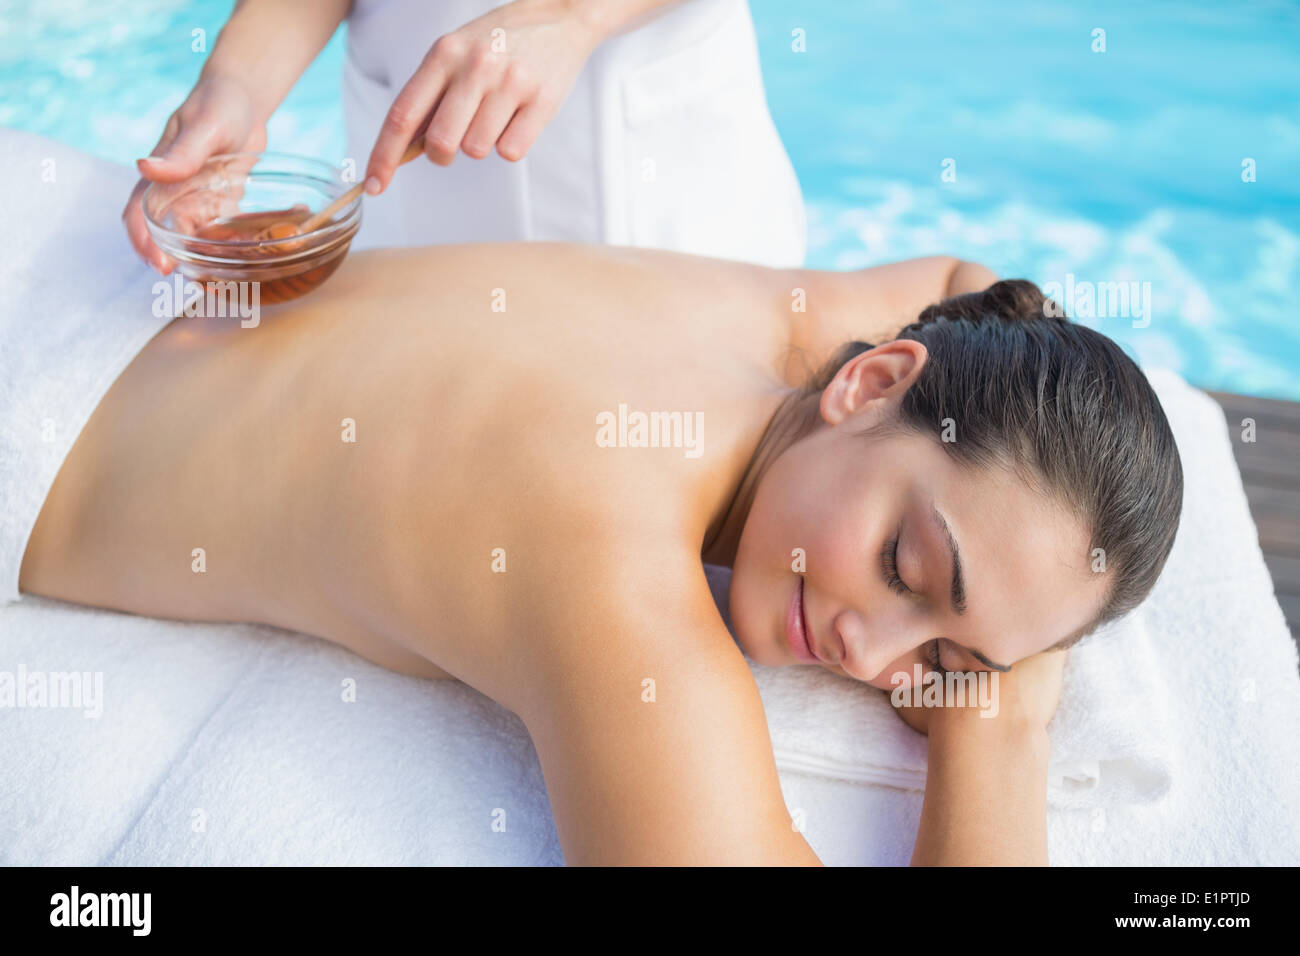 Smiling brunette getting a honey beauty treatment poolside Stock Photo